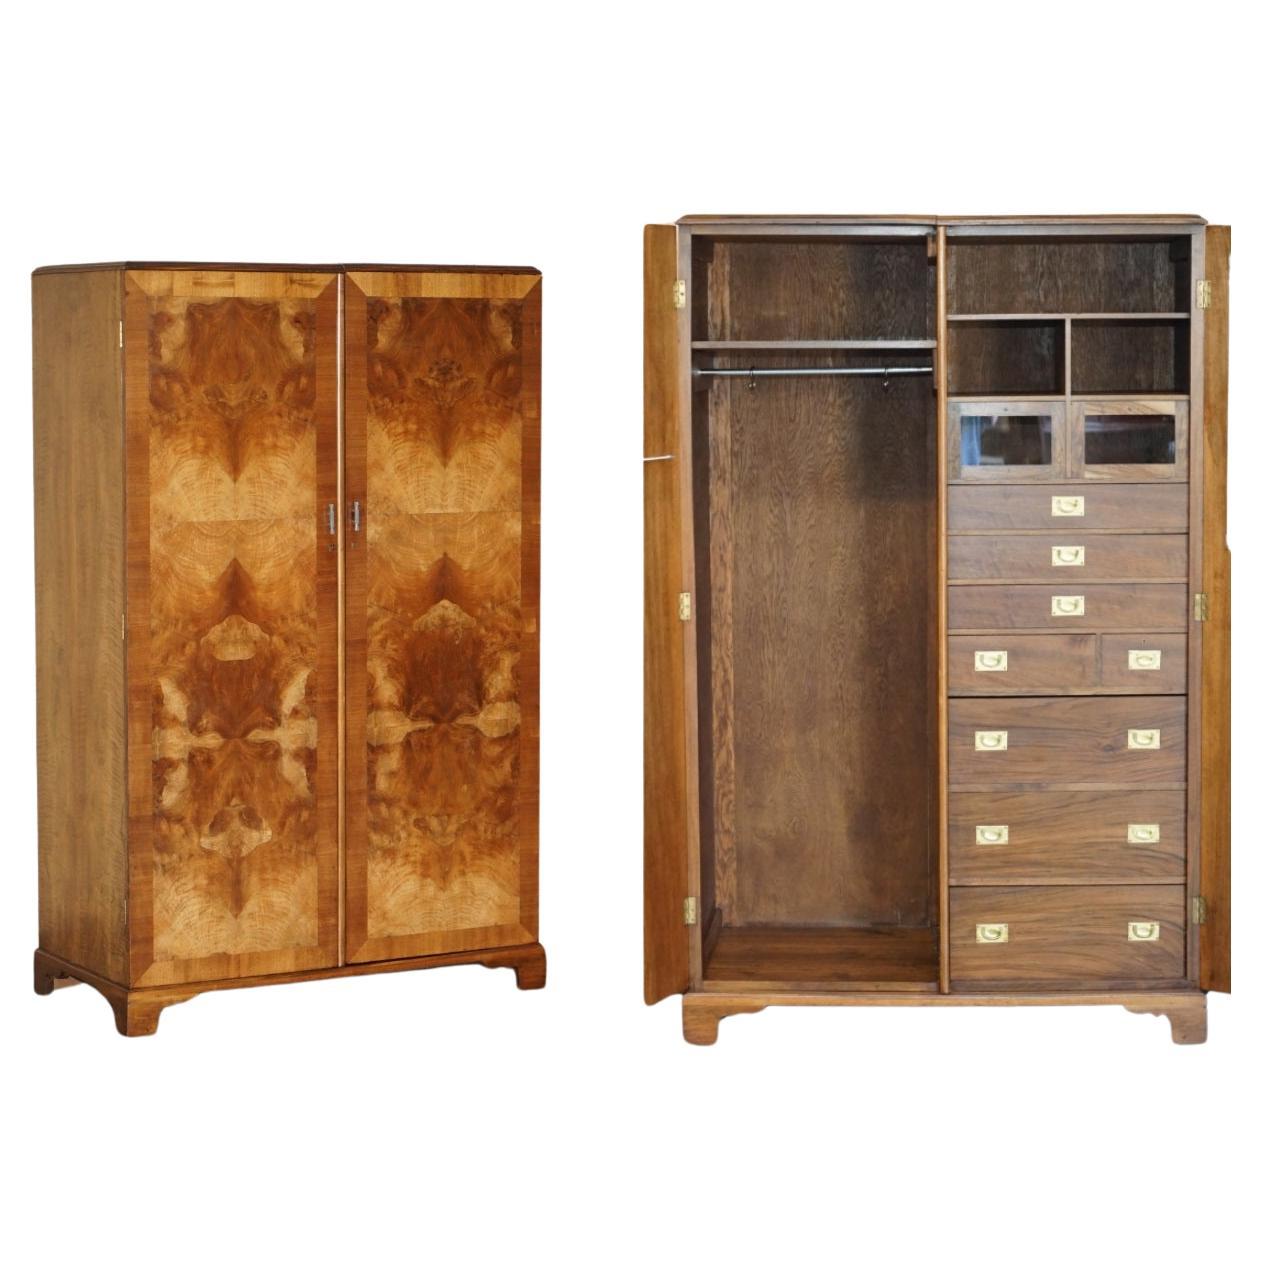 ANTIQUE BURR WALNUT WARDROBE WiTH MILITARY CAMPAIGN CHEST OF DRAWERS BUILT IN im Angebot